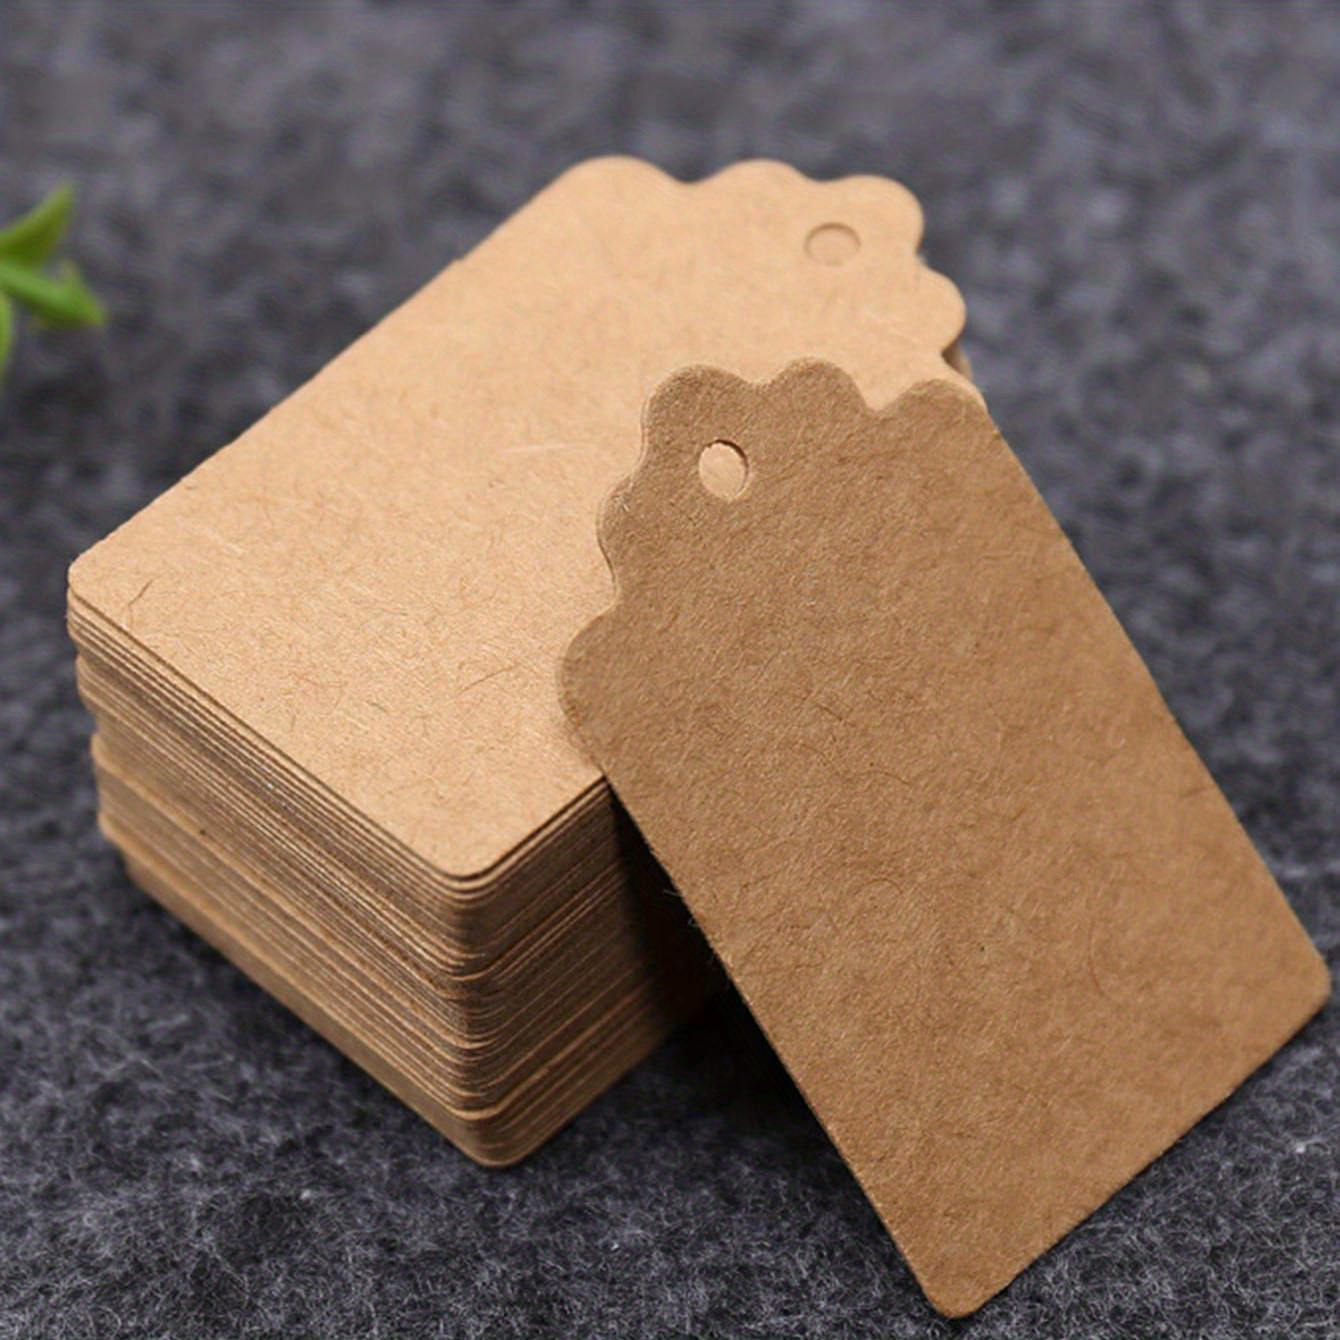 Thank You Tags, 150PCS Brown Kraft Gift Tags with 150PCS Free